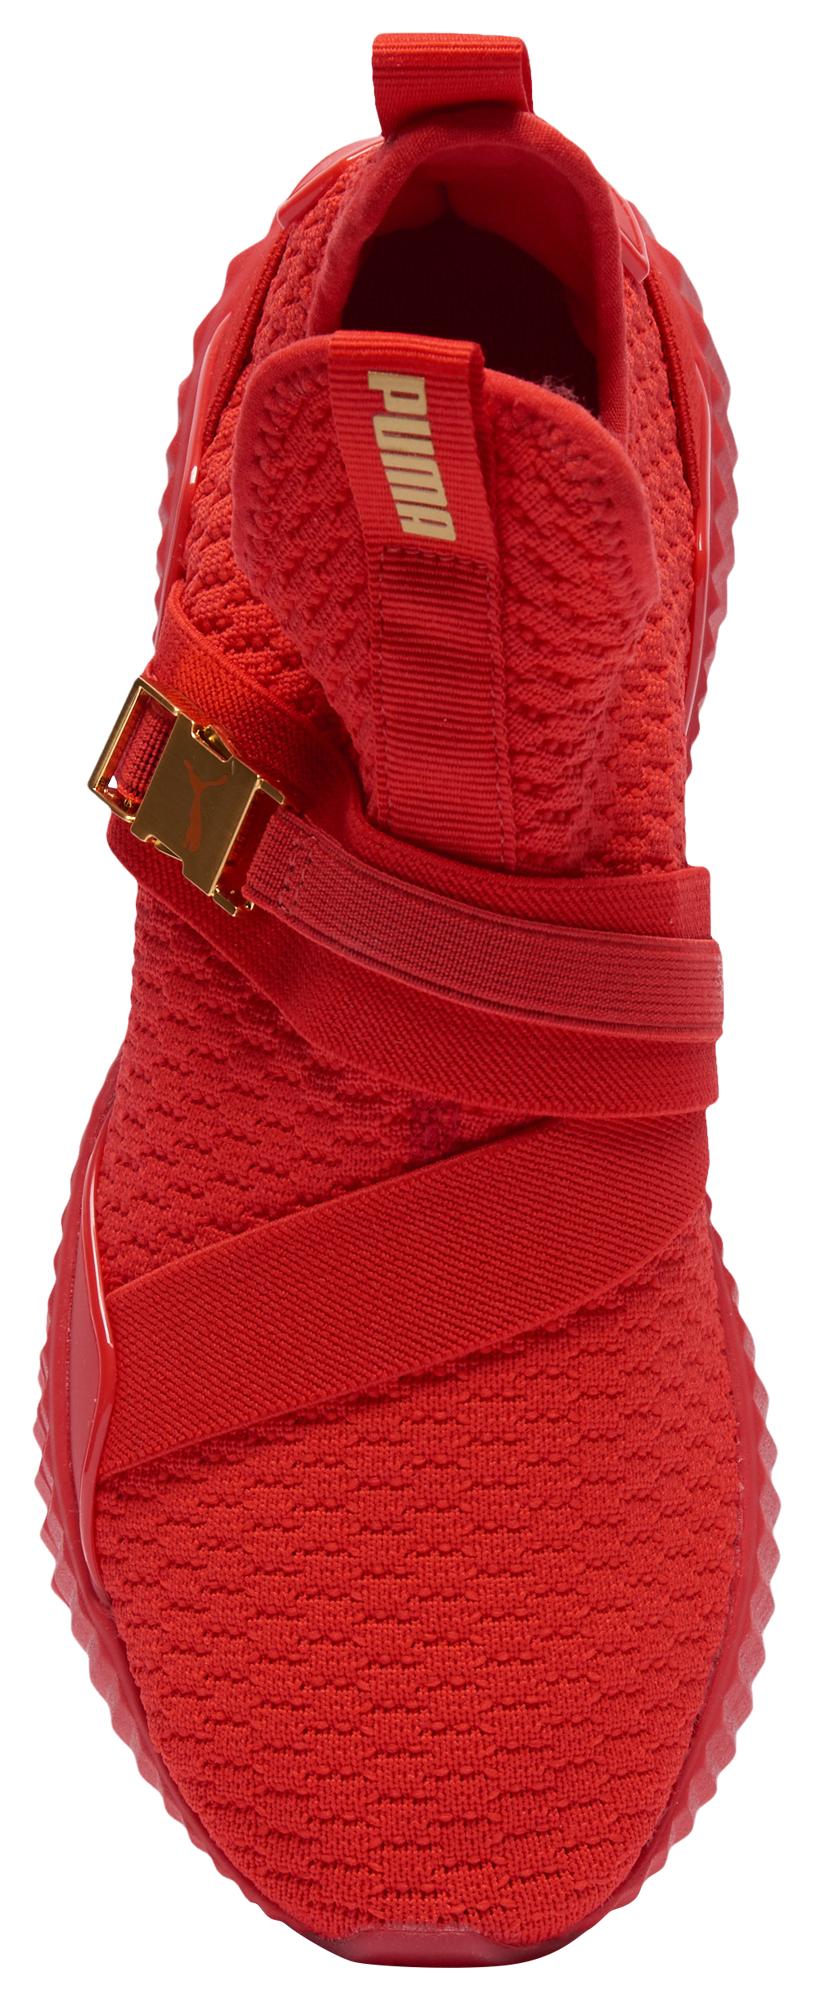 PUMA Rubber Defy Mid Buckle in Red - Lyst